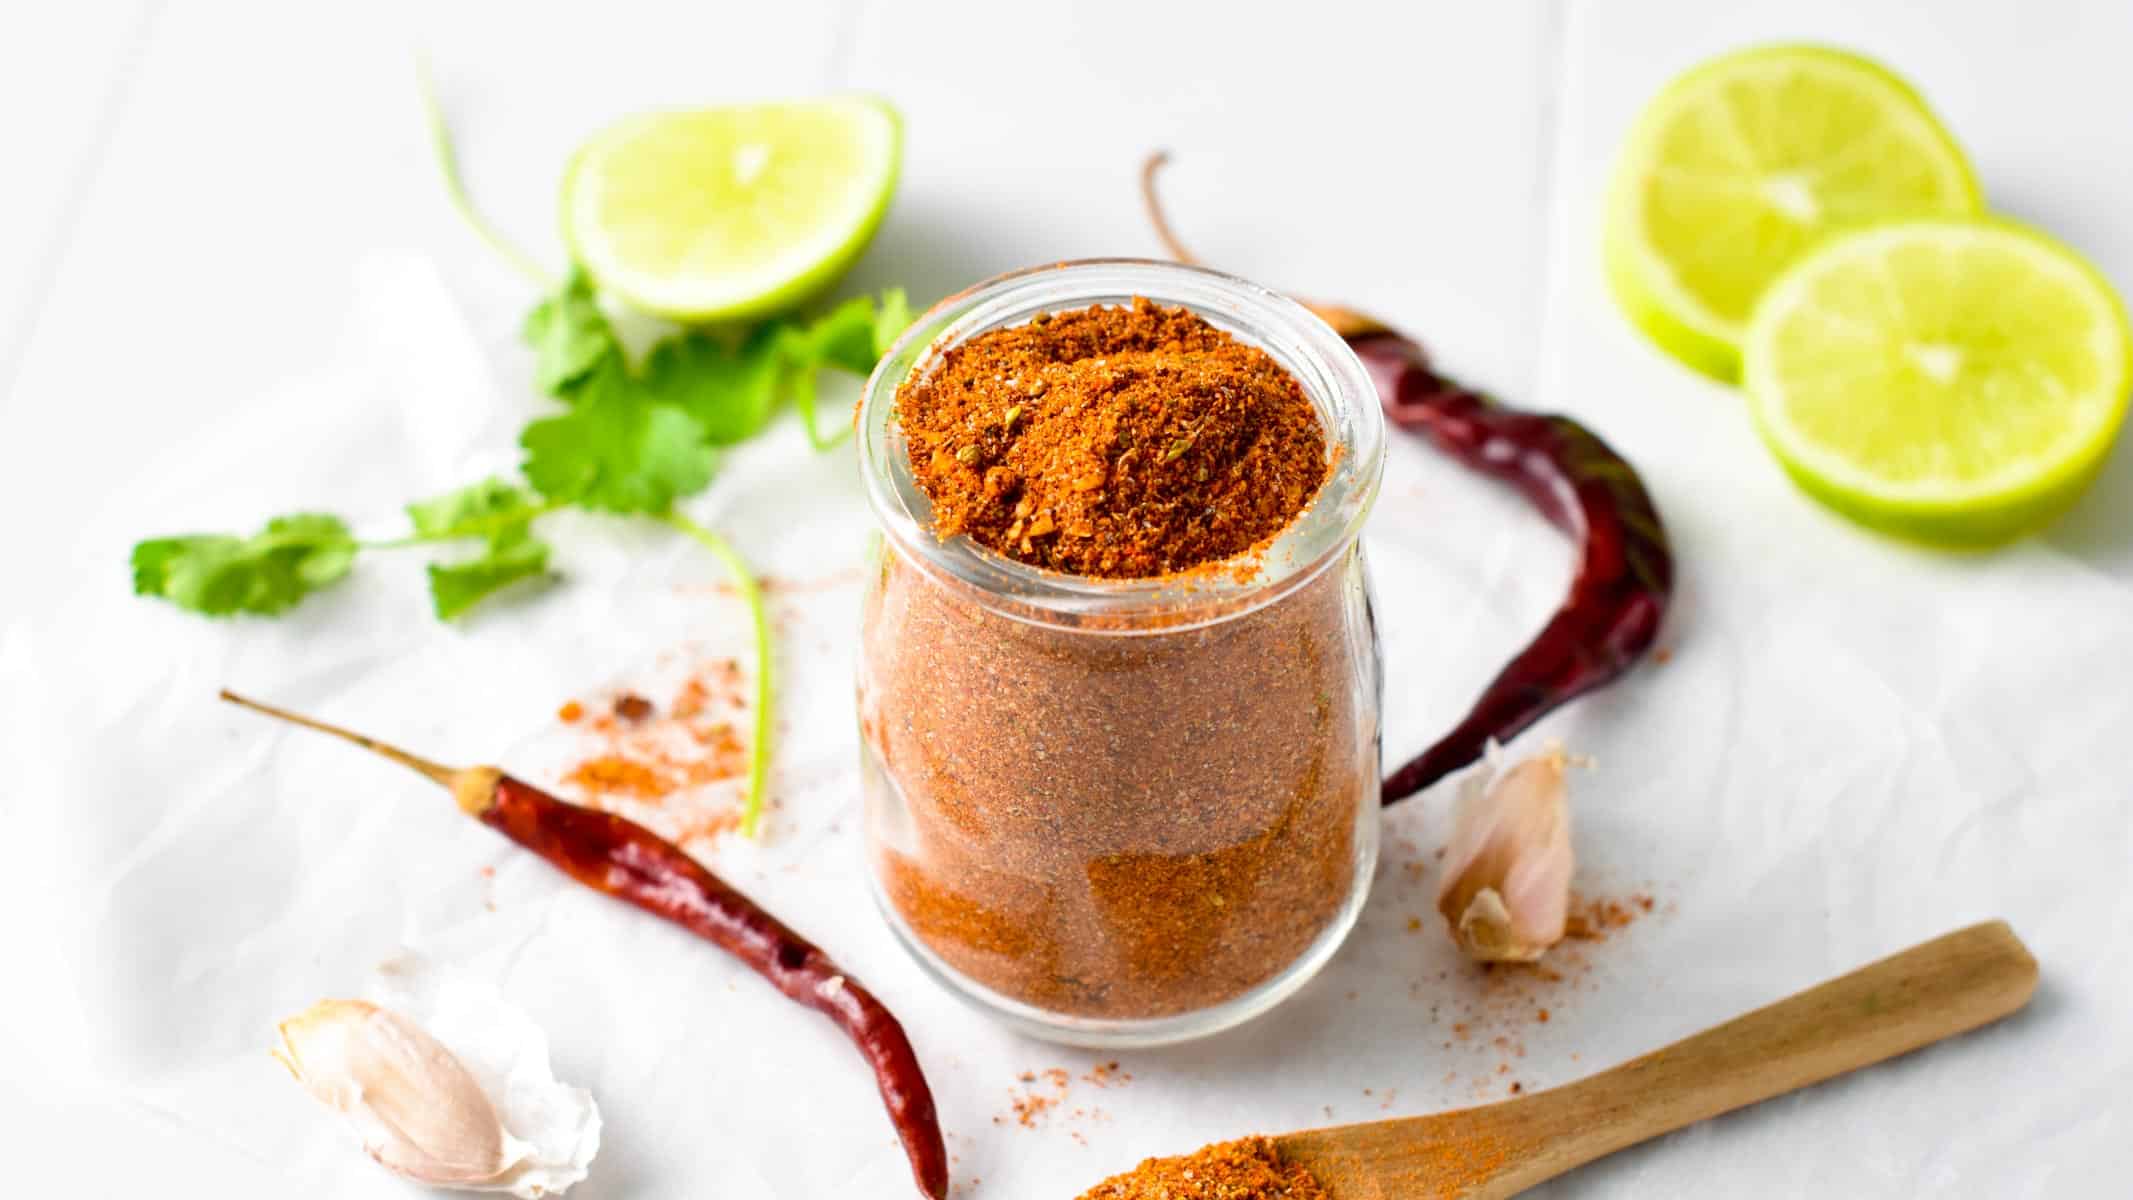 This Carne Asada Seasoning is an easy, tasty seasoning packed with Mexican flavors and is perfect for seasoning your flank steak and making an authentic carne asada.